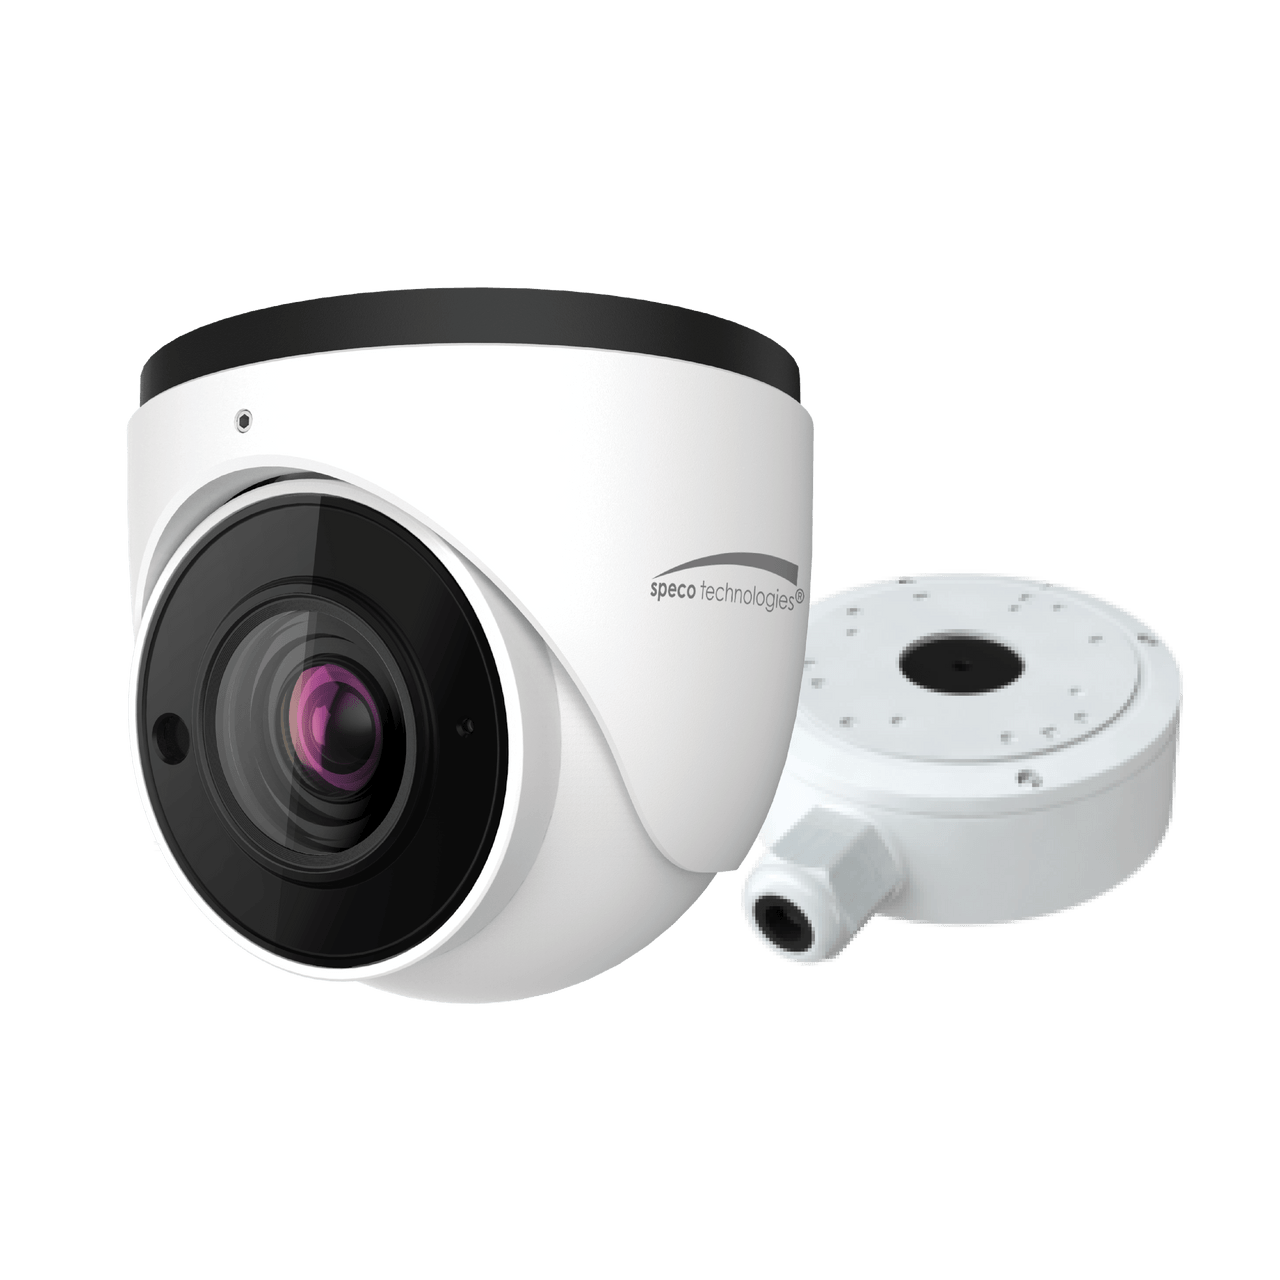 Speco Technologies O4T7M 4MP H.265 AI IP Turret Camera,IR, 2.8-12mm Motorized lens, Included Junc Box, White housing (O4T7M)